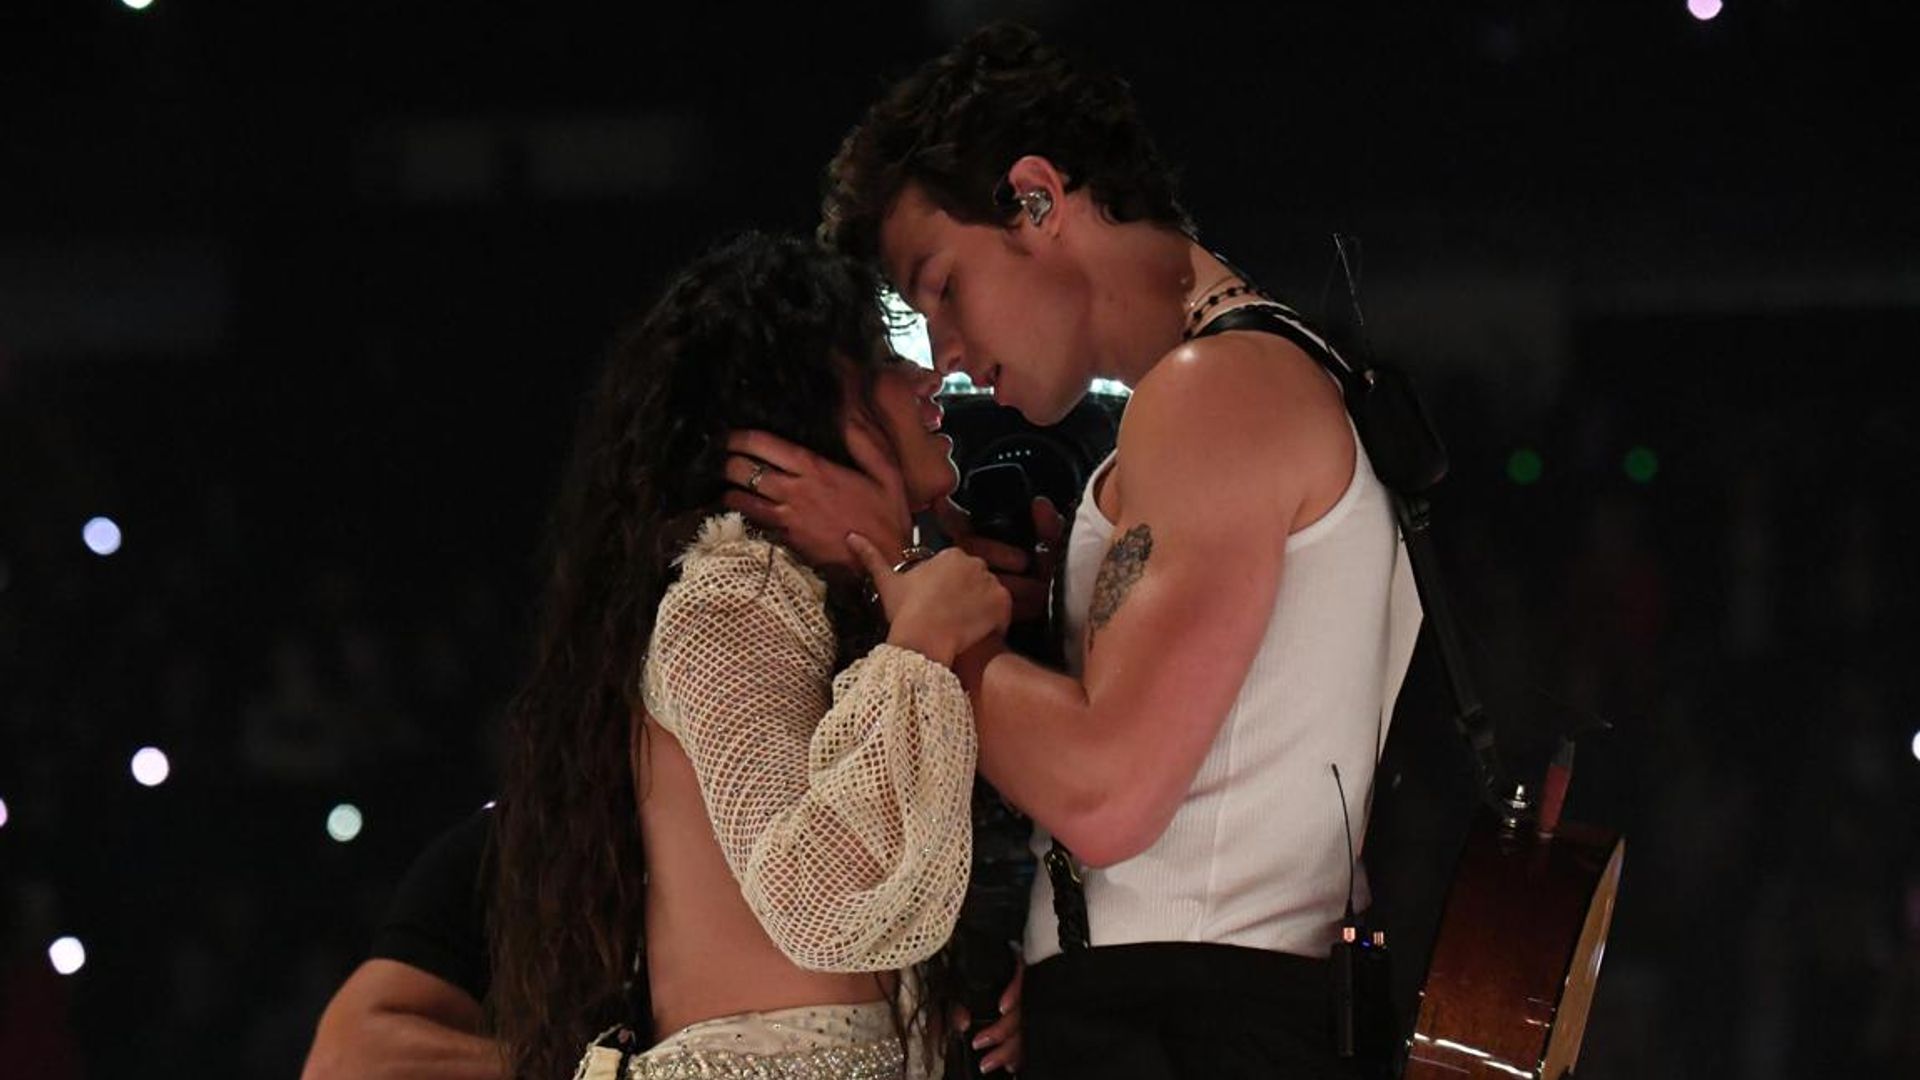 Camila Cabello shares where she and Shawn Mendes had their first date and kiss